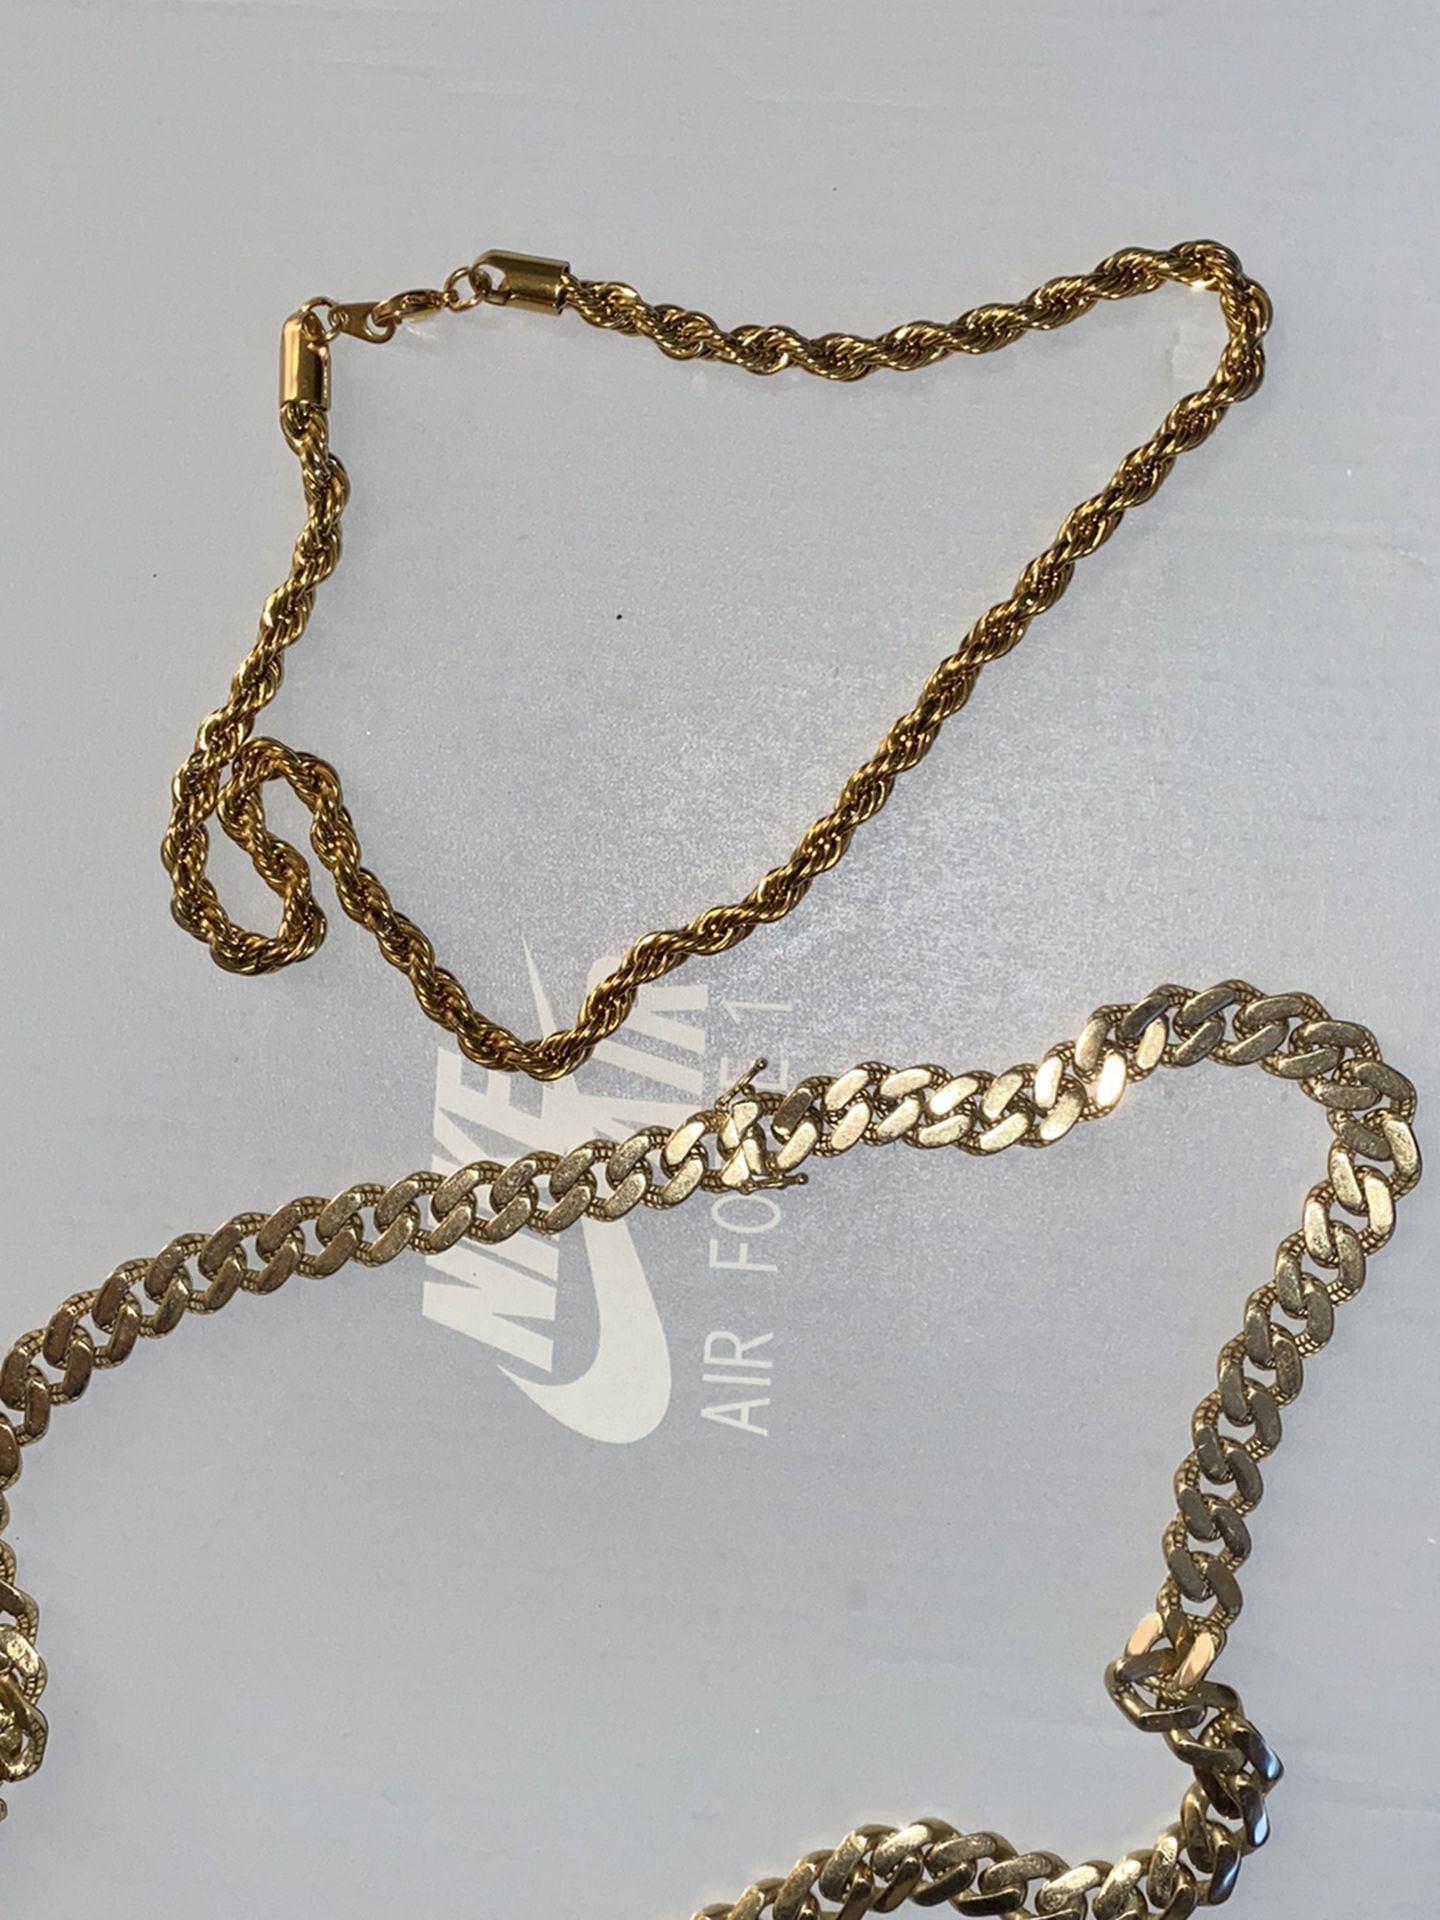 2 Solid Gold Chains (Looks Real , Feels Real) each worn 1x